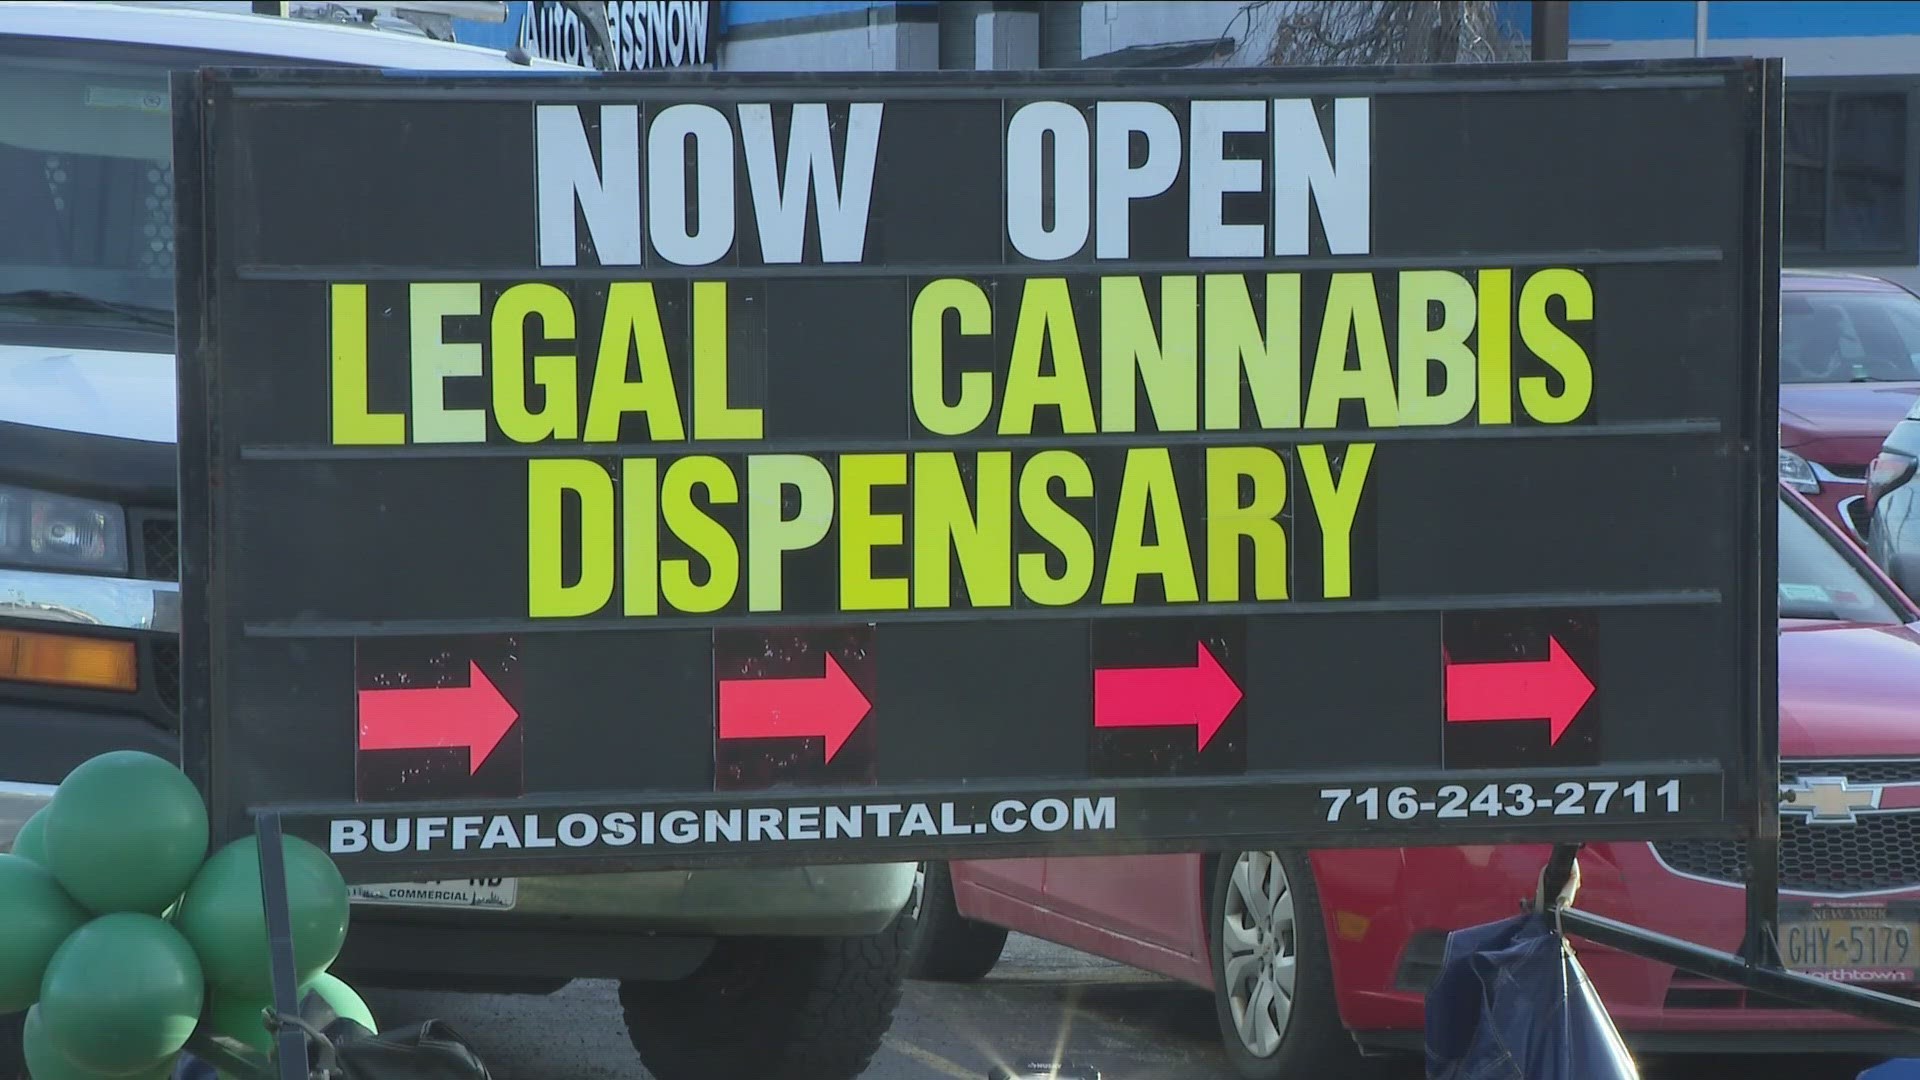 Puffalo Dreams their legal dispensary opened on Niagara Falls Blvd. in Buffalo. But NYS is concerned about all of the illegal shops popping up.